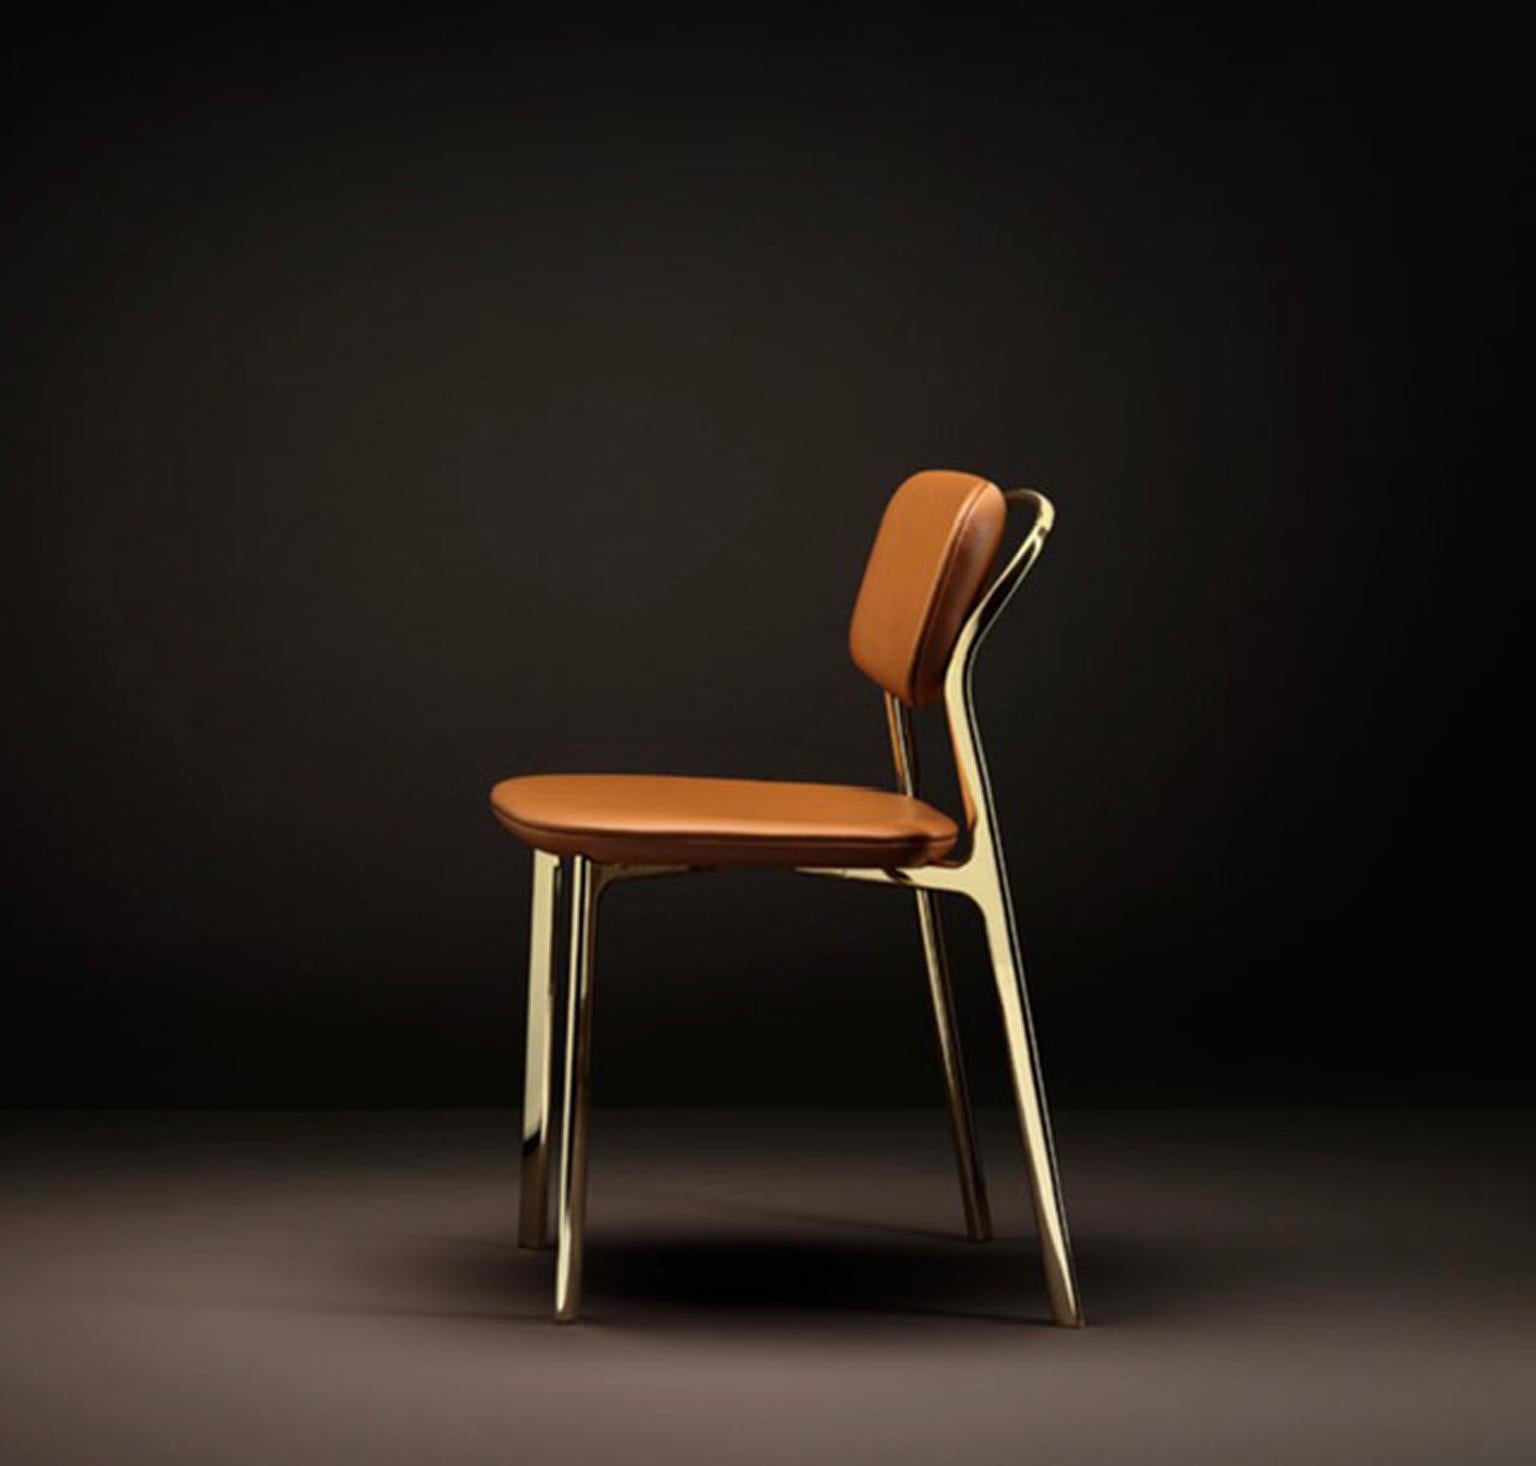 The design of this iconic Ghidini 1961 chair was inspired by the Californian coastline.
Blending refined architectural elements with fluid gestures, the chair's form brings surprising design moments to a functional, everyday object. A mix of